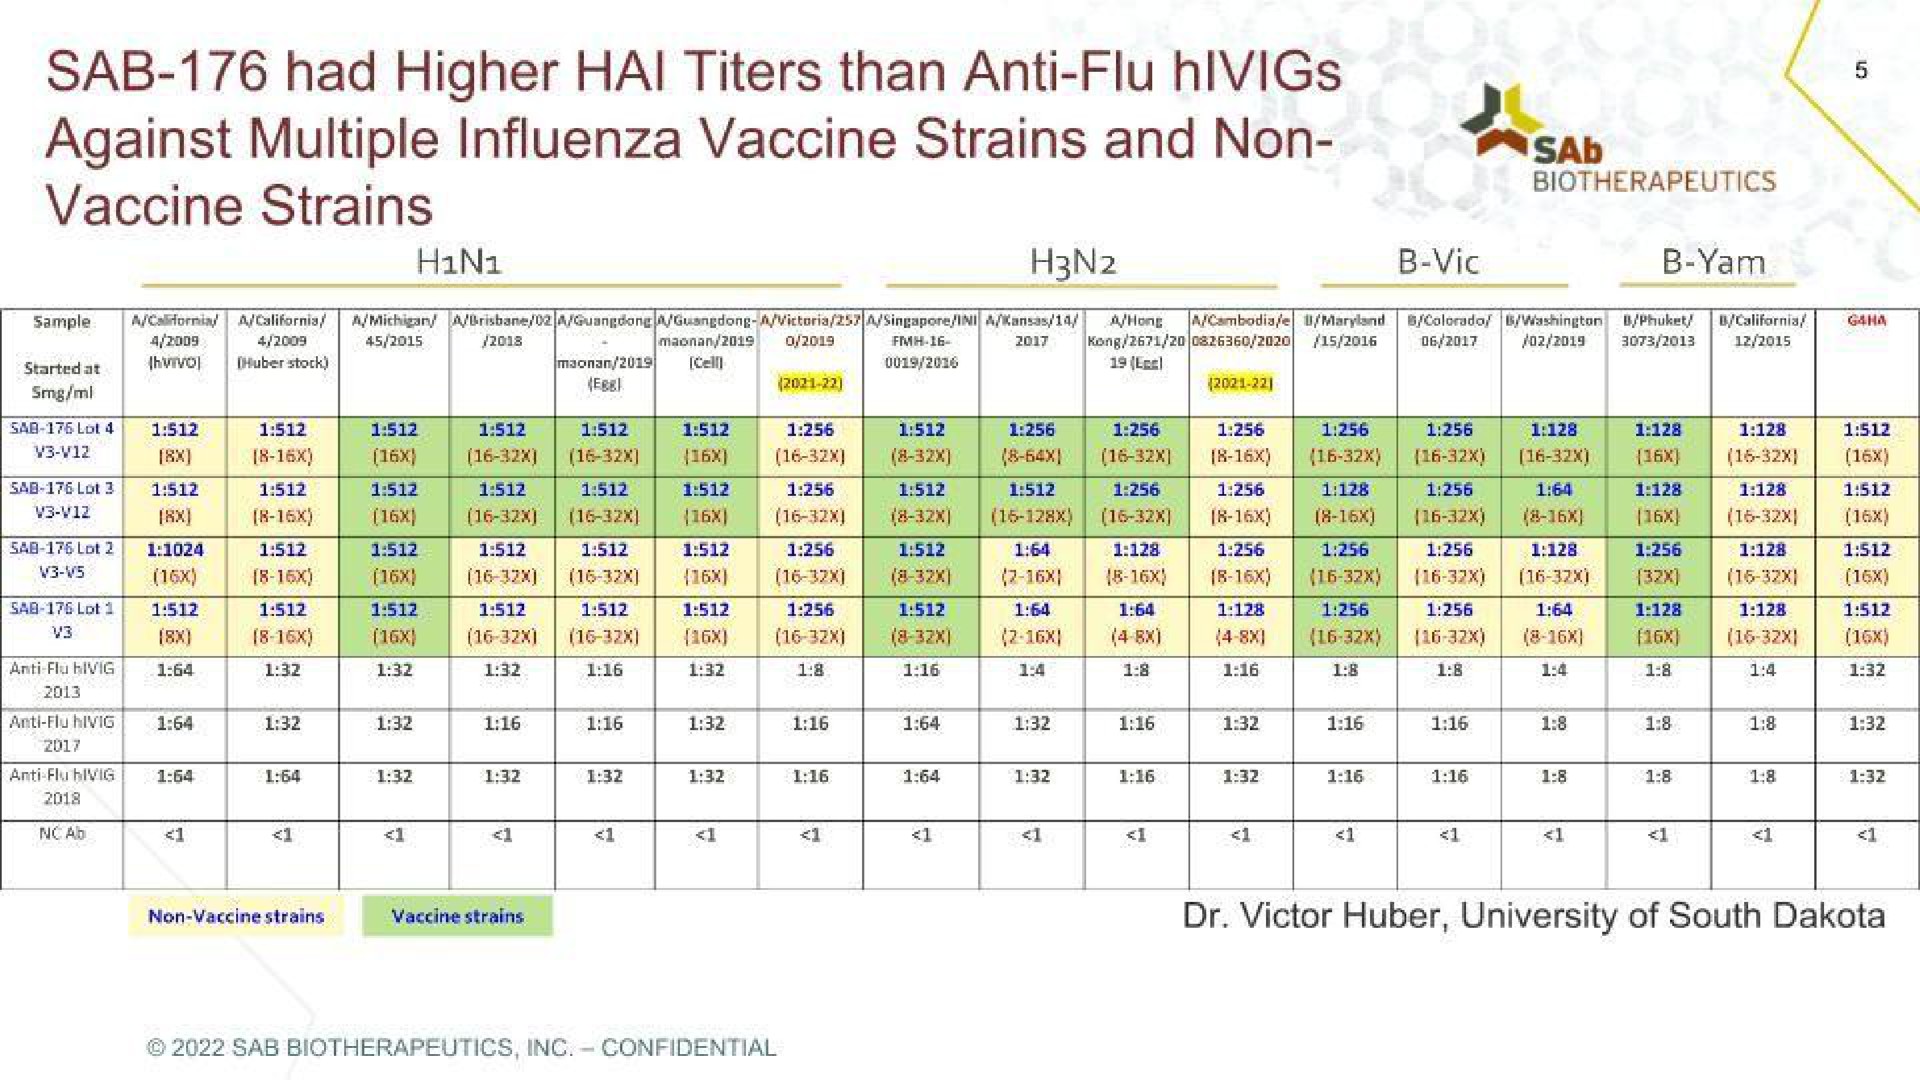 sab had higher titers than anti flu against multiple influenza vaccine strains and non | SAB Biotherapeutics